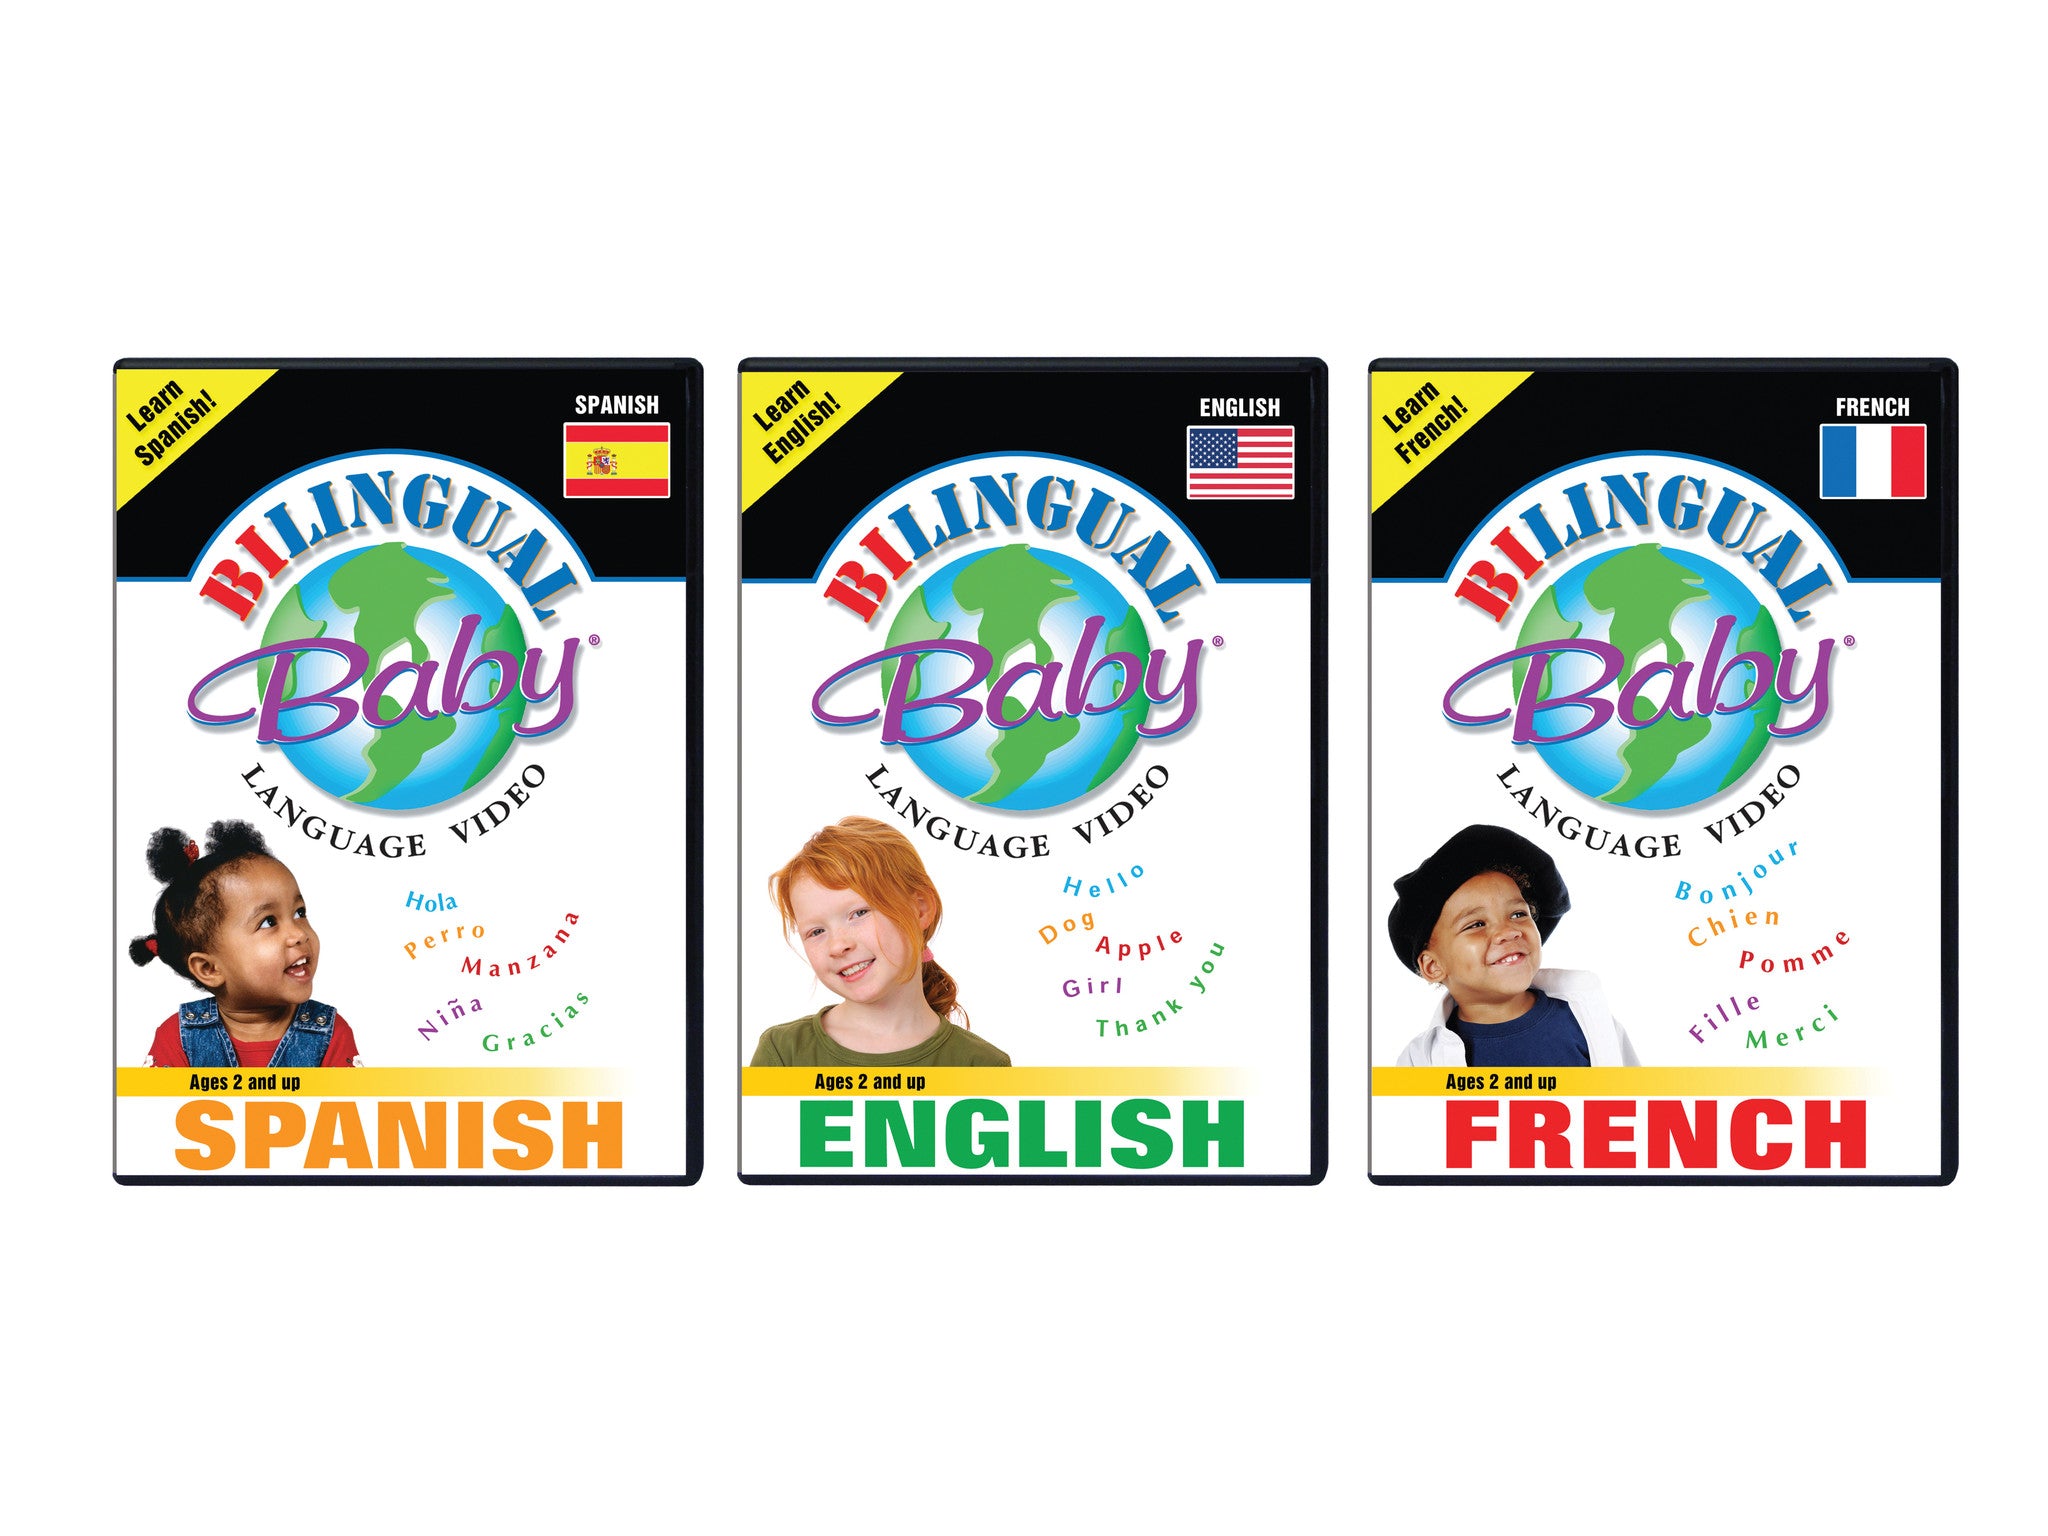 Learning　English　Brainy　Videos　Learn　The　Baby　Spanish,　–　French　Store